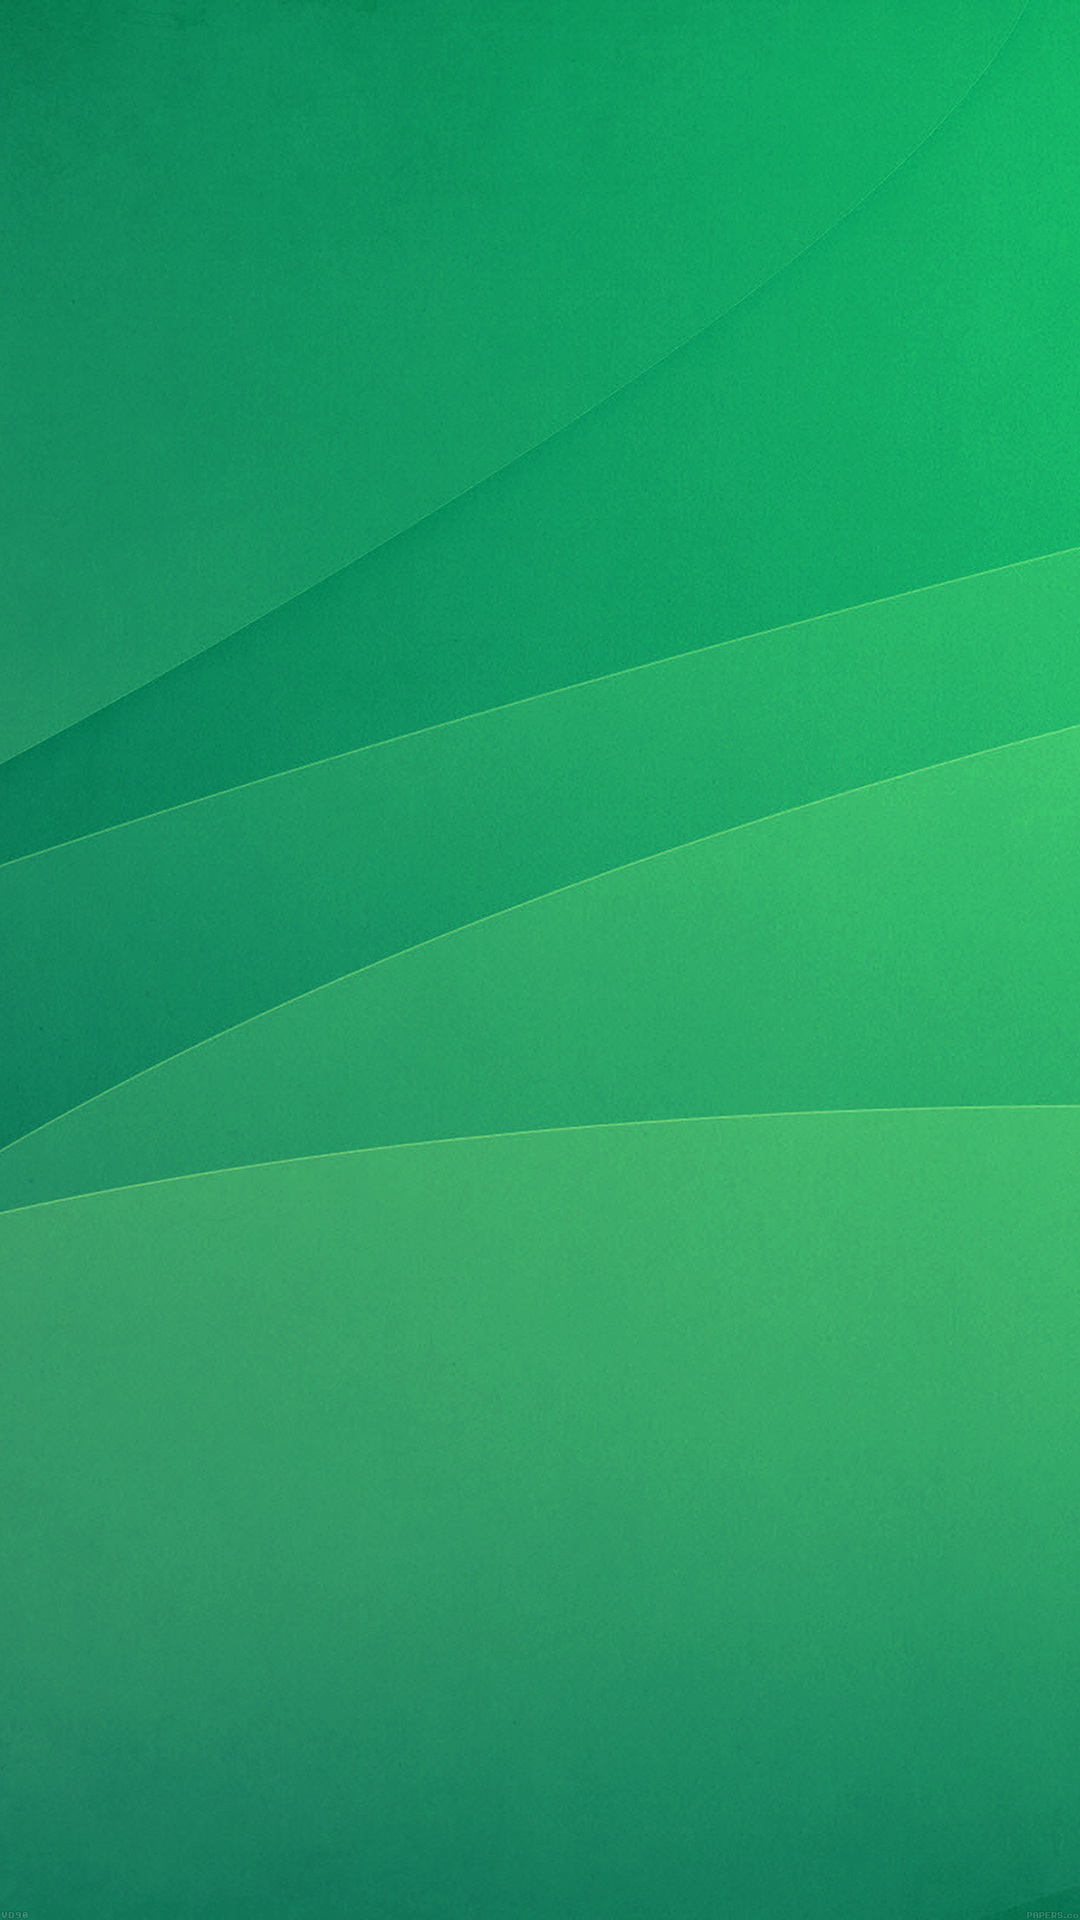 Shining Aqua Green Best Htc M9 Wallpaper And Easy To